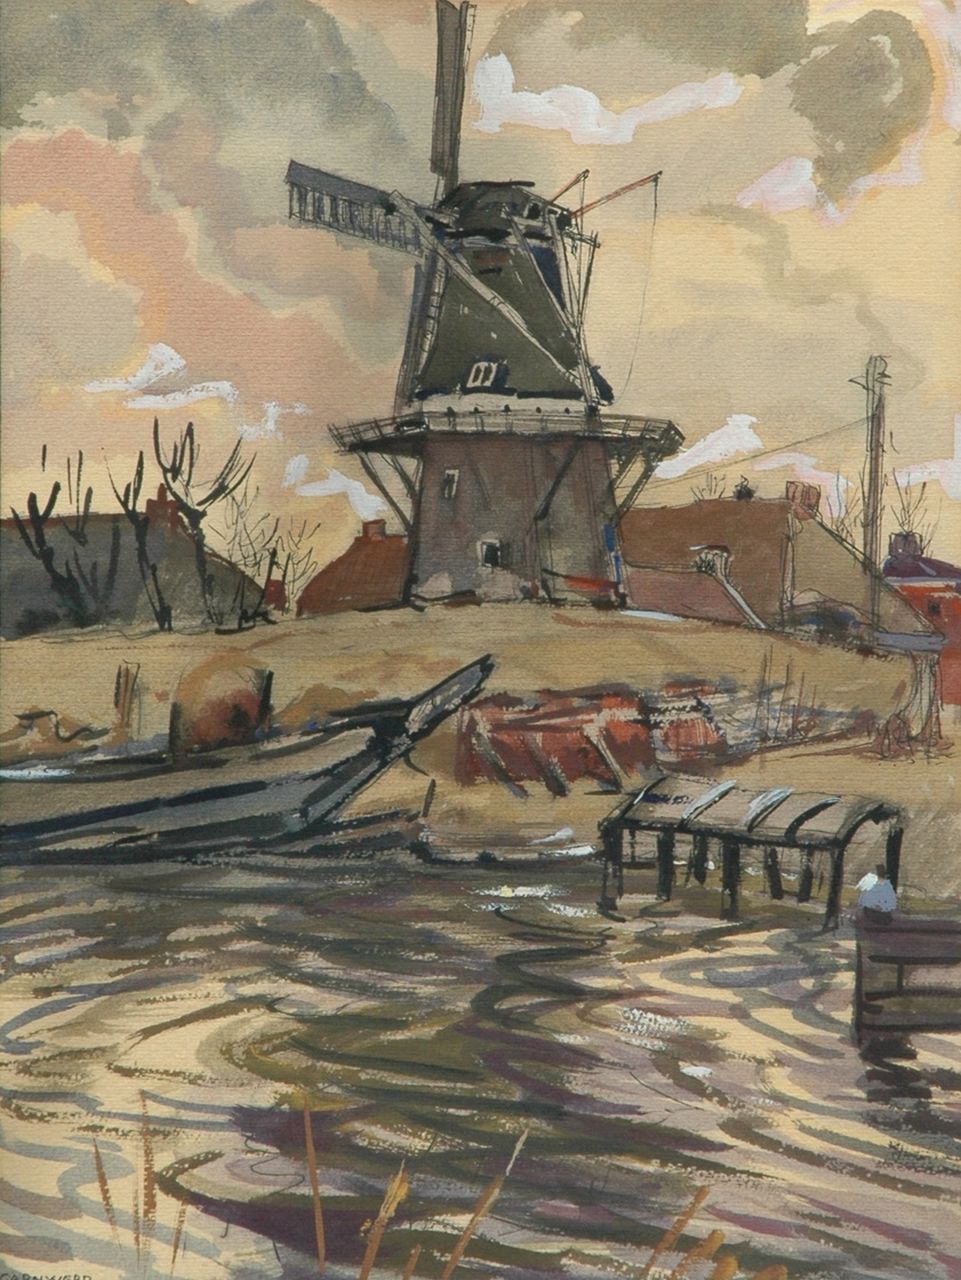 Vries J. de | Jannes de Vries, Windmill in Garnwerd, East Indian ink and gouache on paper 49.2 x 37.5 cm, signed l.l. with monogram and dated 27-3-'54